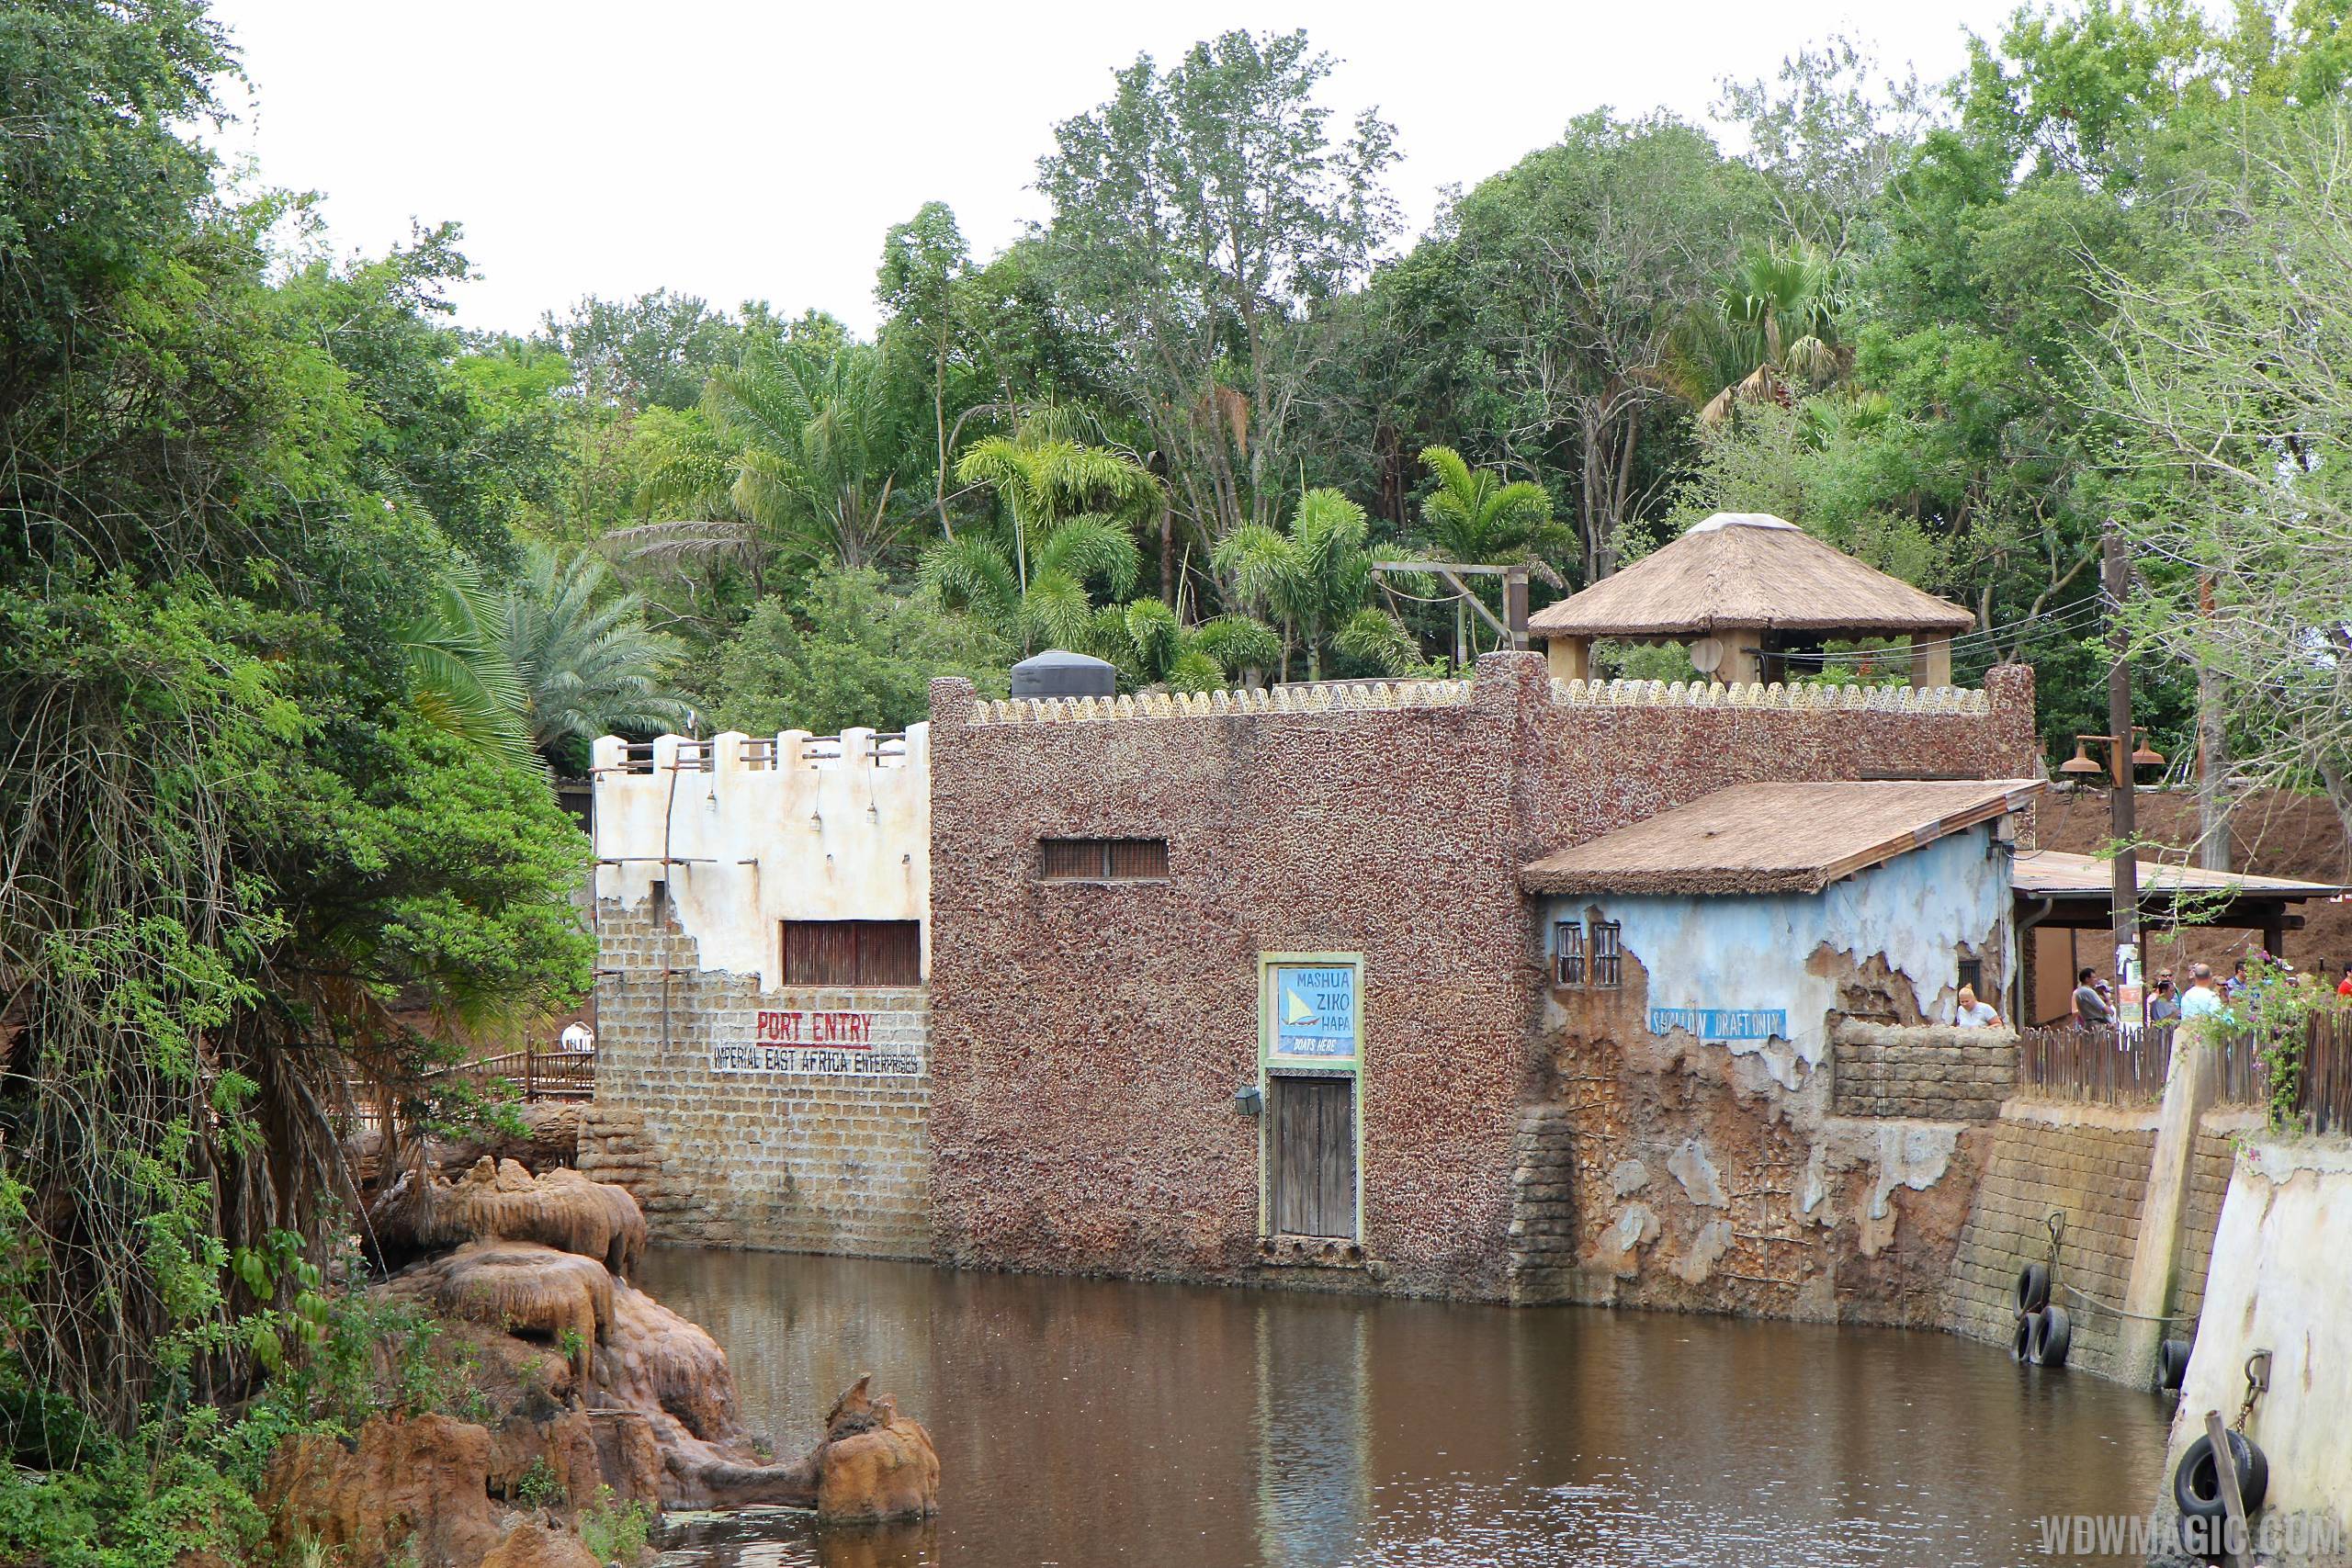 New Harambe Theatre area in Africa - Restroom buildings